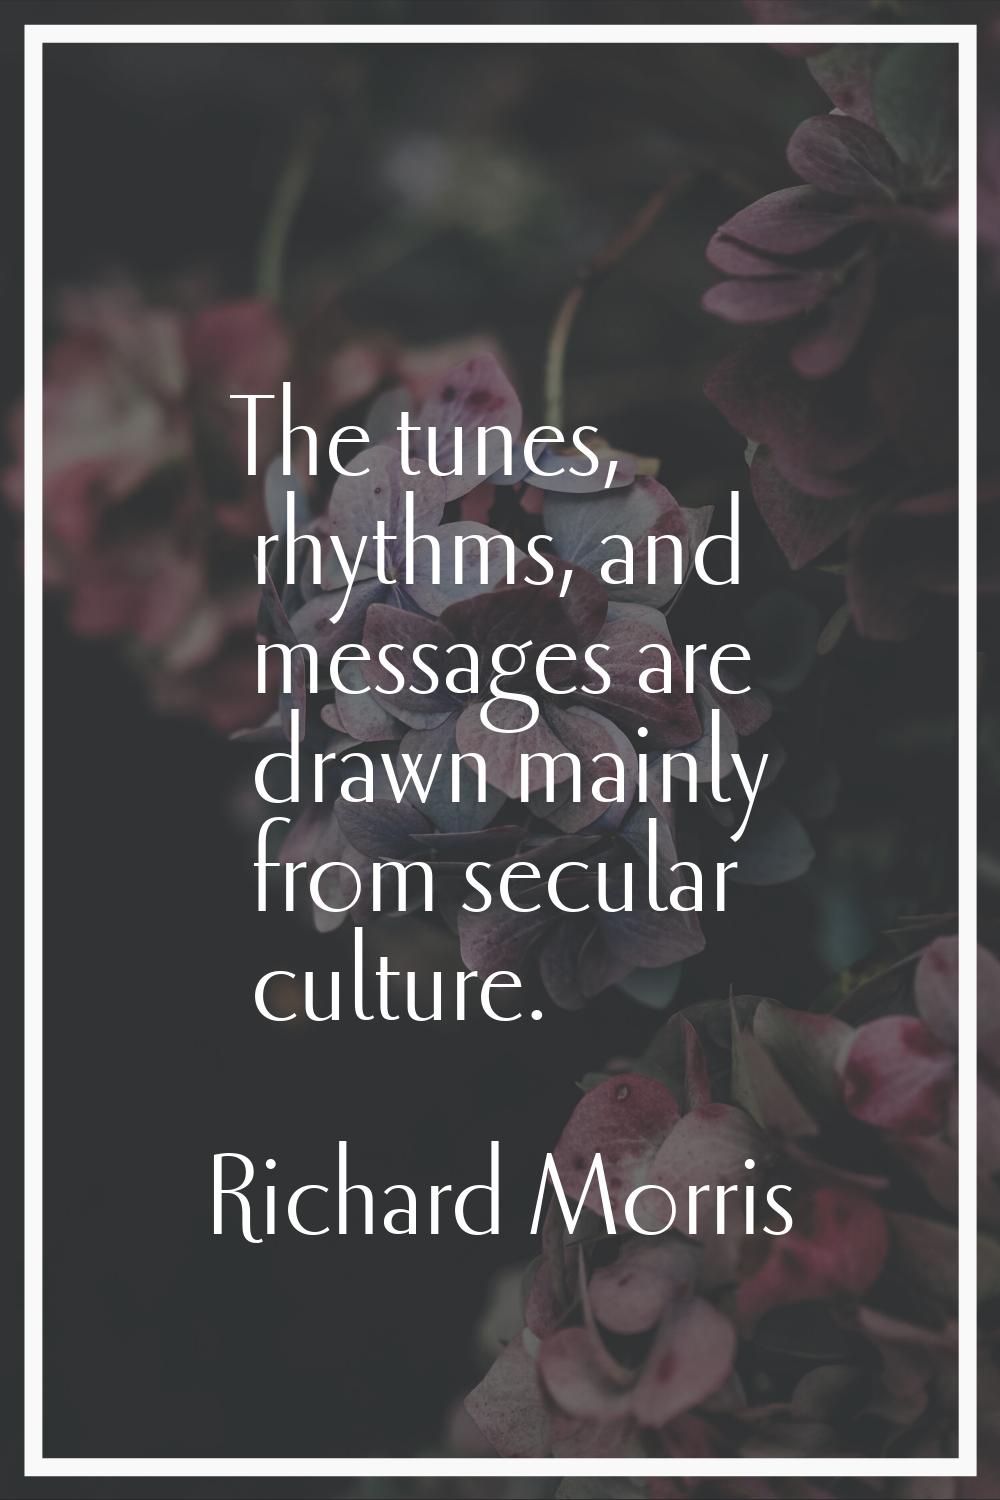 The tunes, rhythms, and messages are drawn mainly from secular culture.